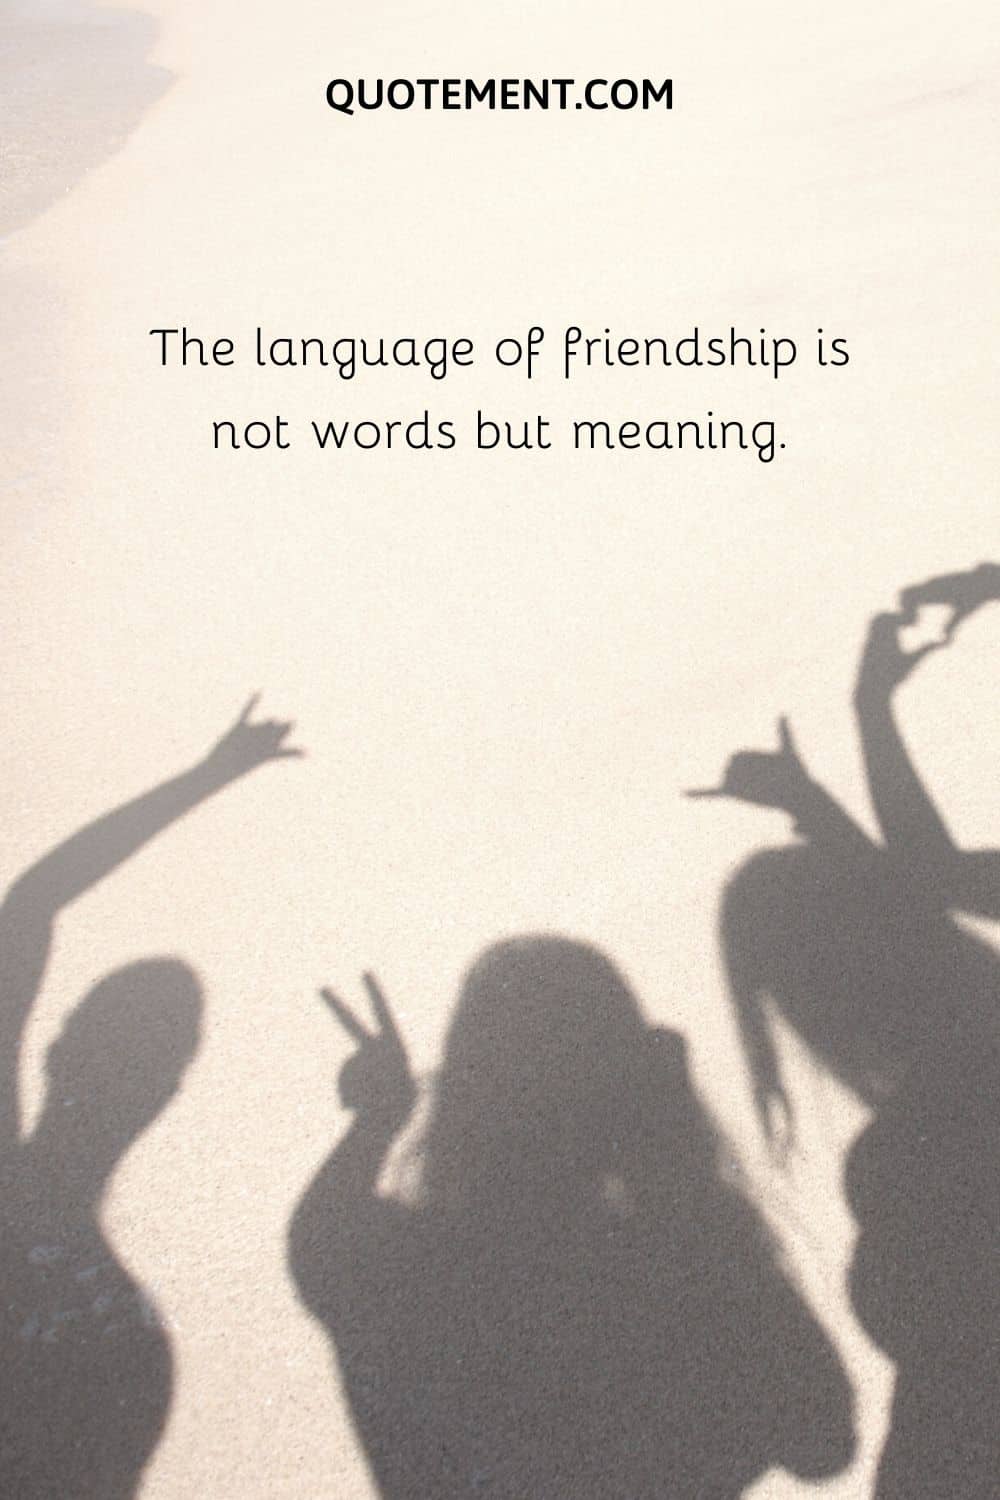 The language of friendship is not words but meaning